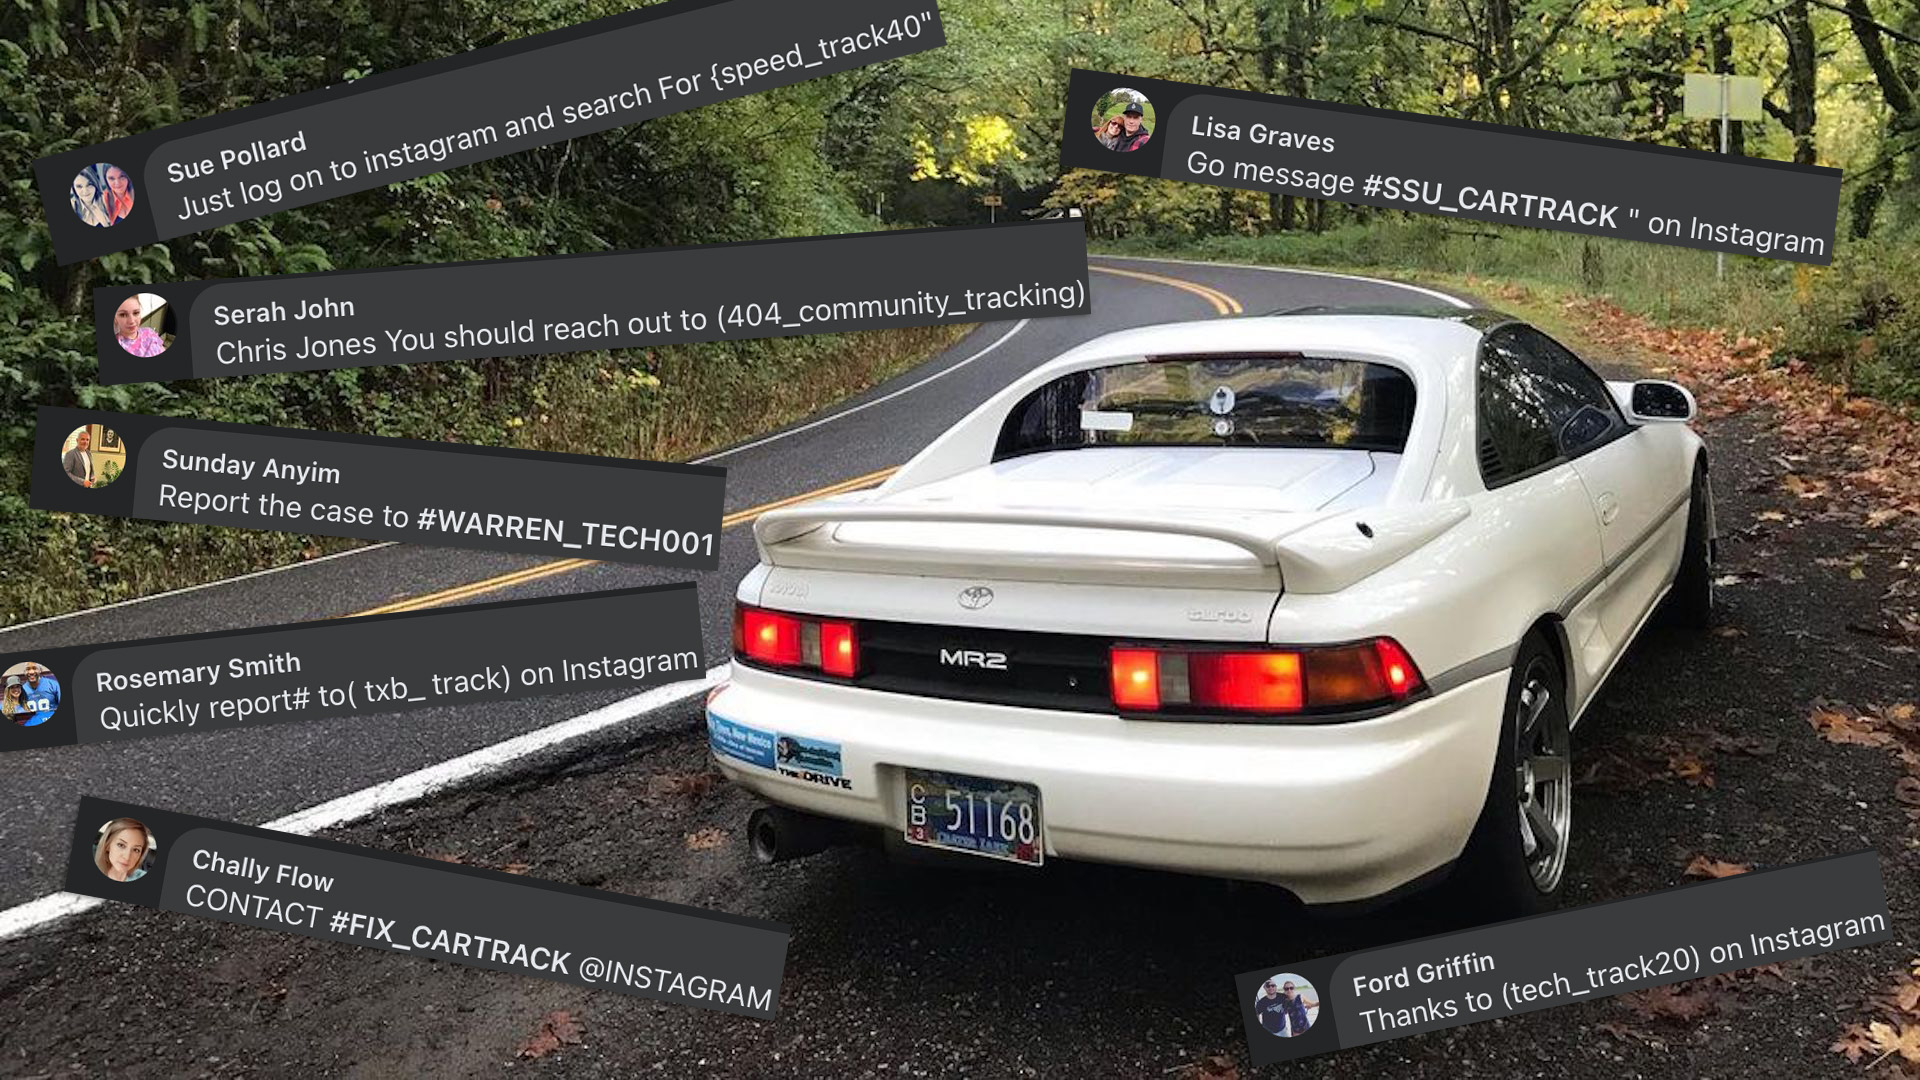 Screen captures of automated scam messages on Facebook directing users to seek out fake Instagram accounts. The comments float over a picture of a white Toyota MR2 sports car on a winding road flanked by trees with yellowing leaves of the autumn.